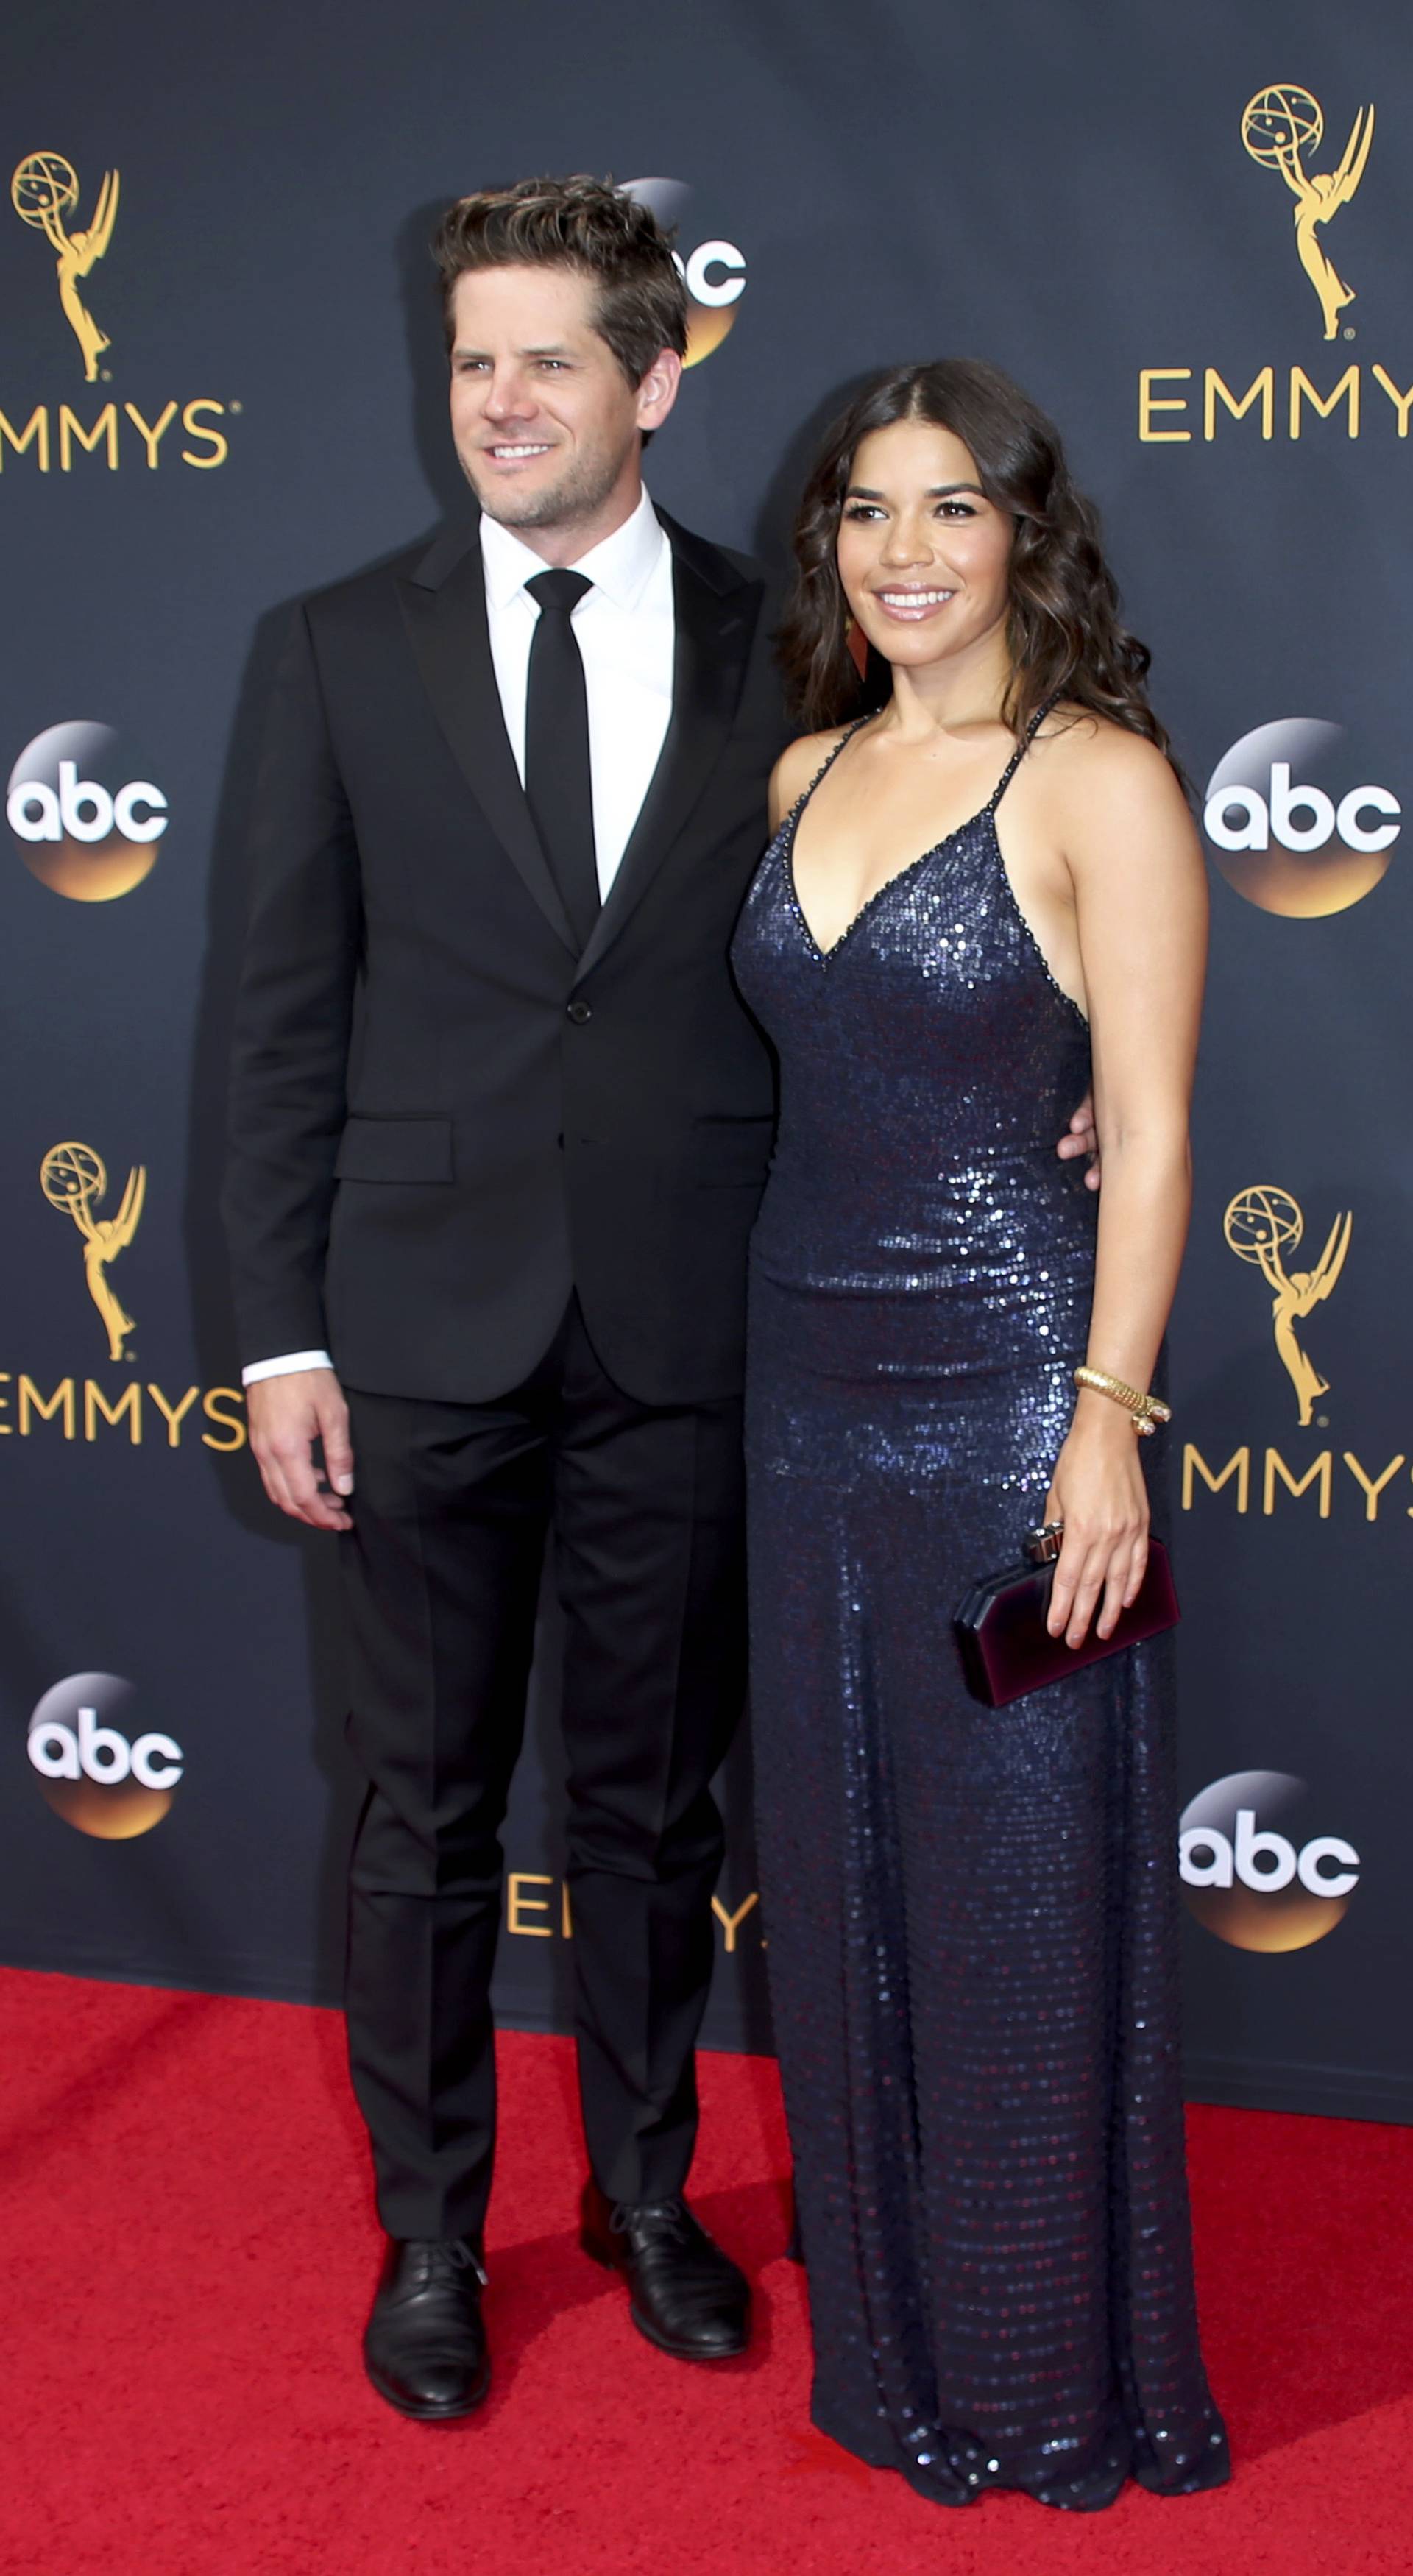 Actress Ferrera and husband Williams arrive at the 68th Primetime Emmy Awards in Los Angeles